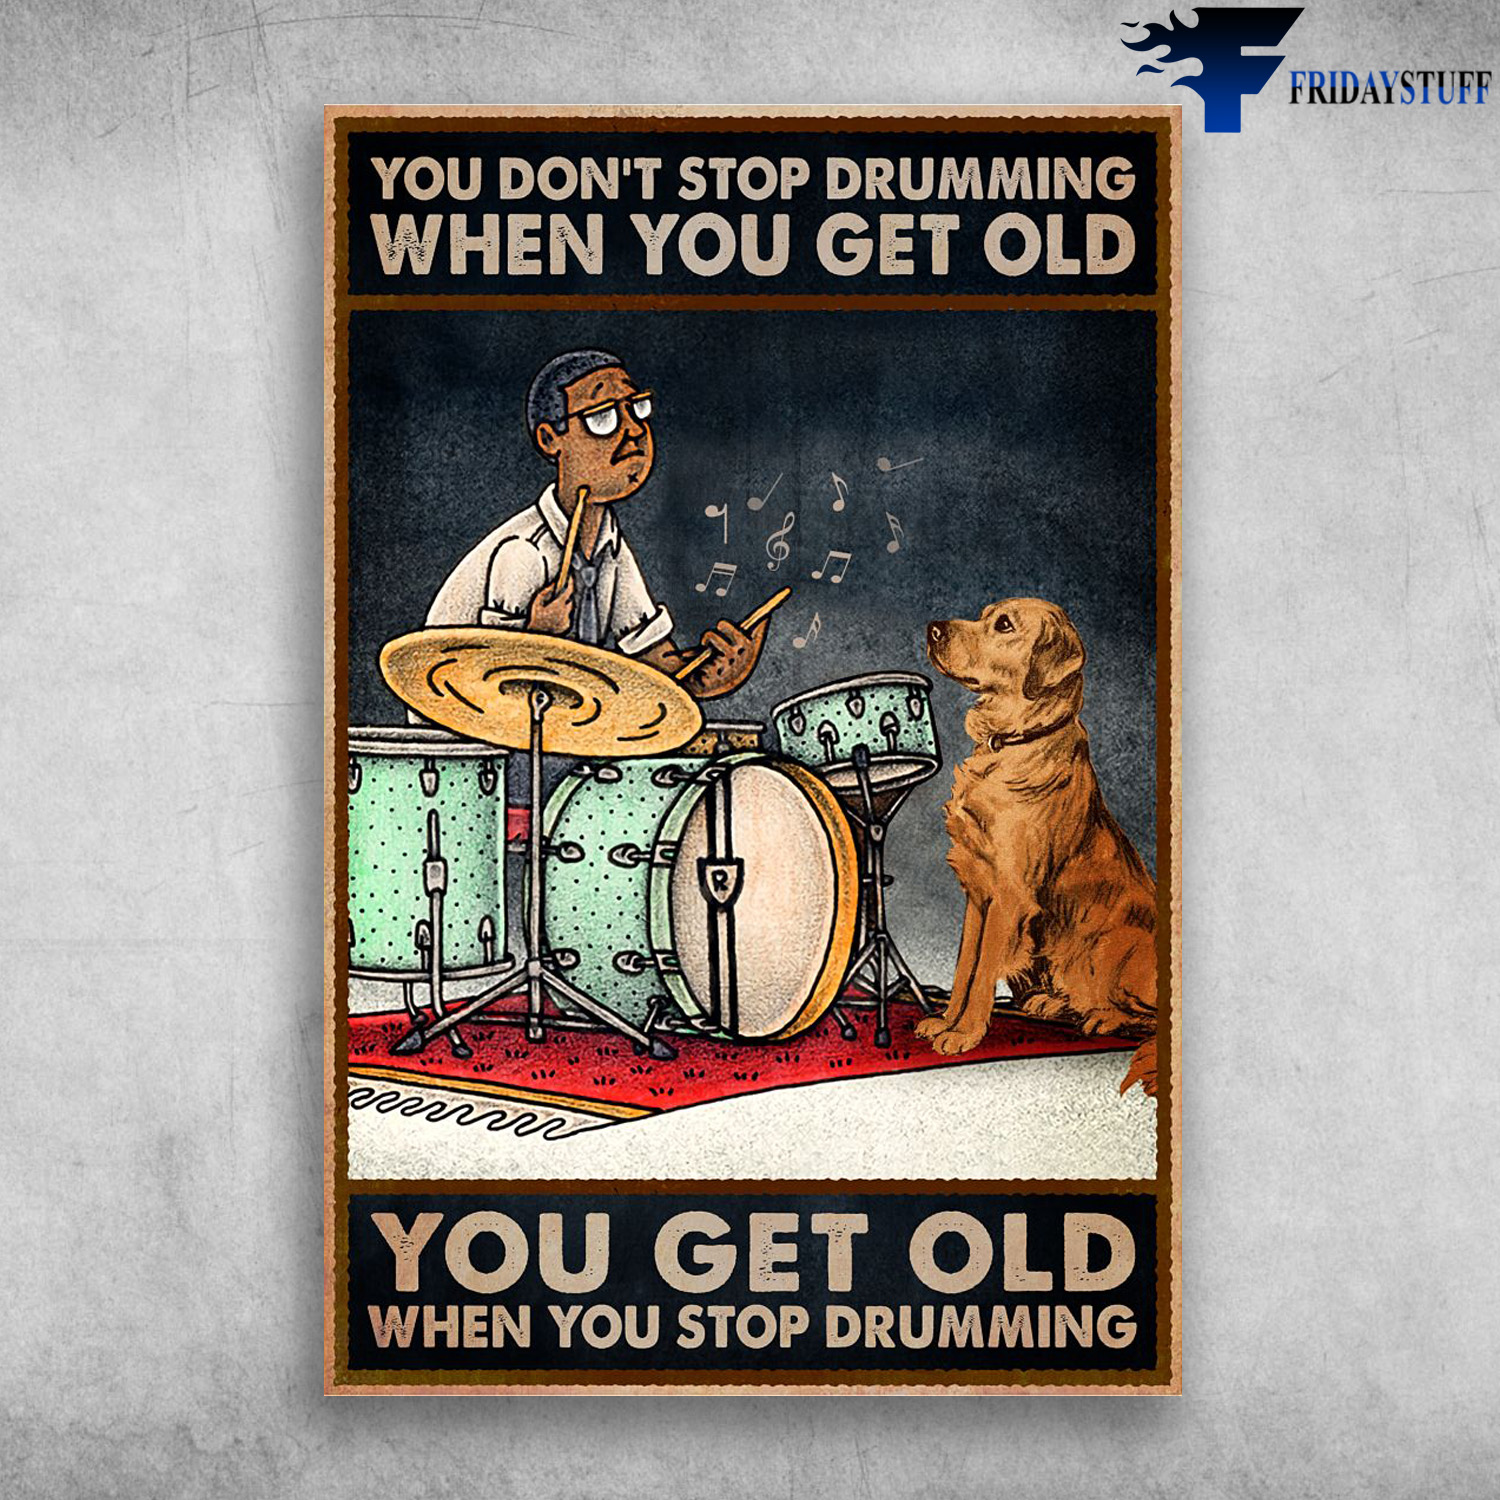 Old Drummer And The Dog - You Don't Stop Drumming When You Get Old, You Get Old When You Sto Drumming